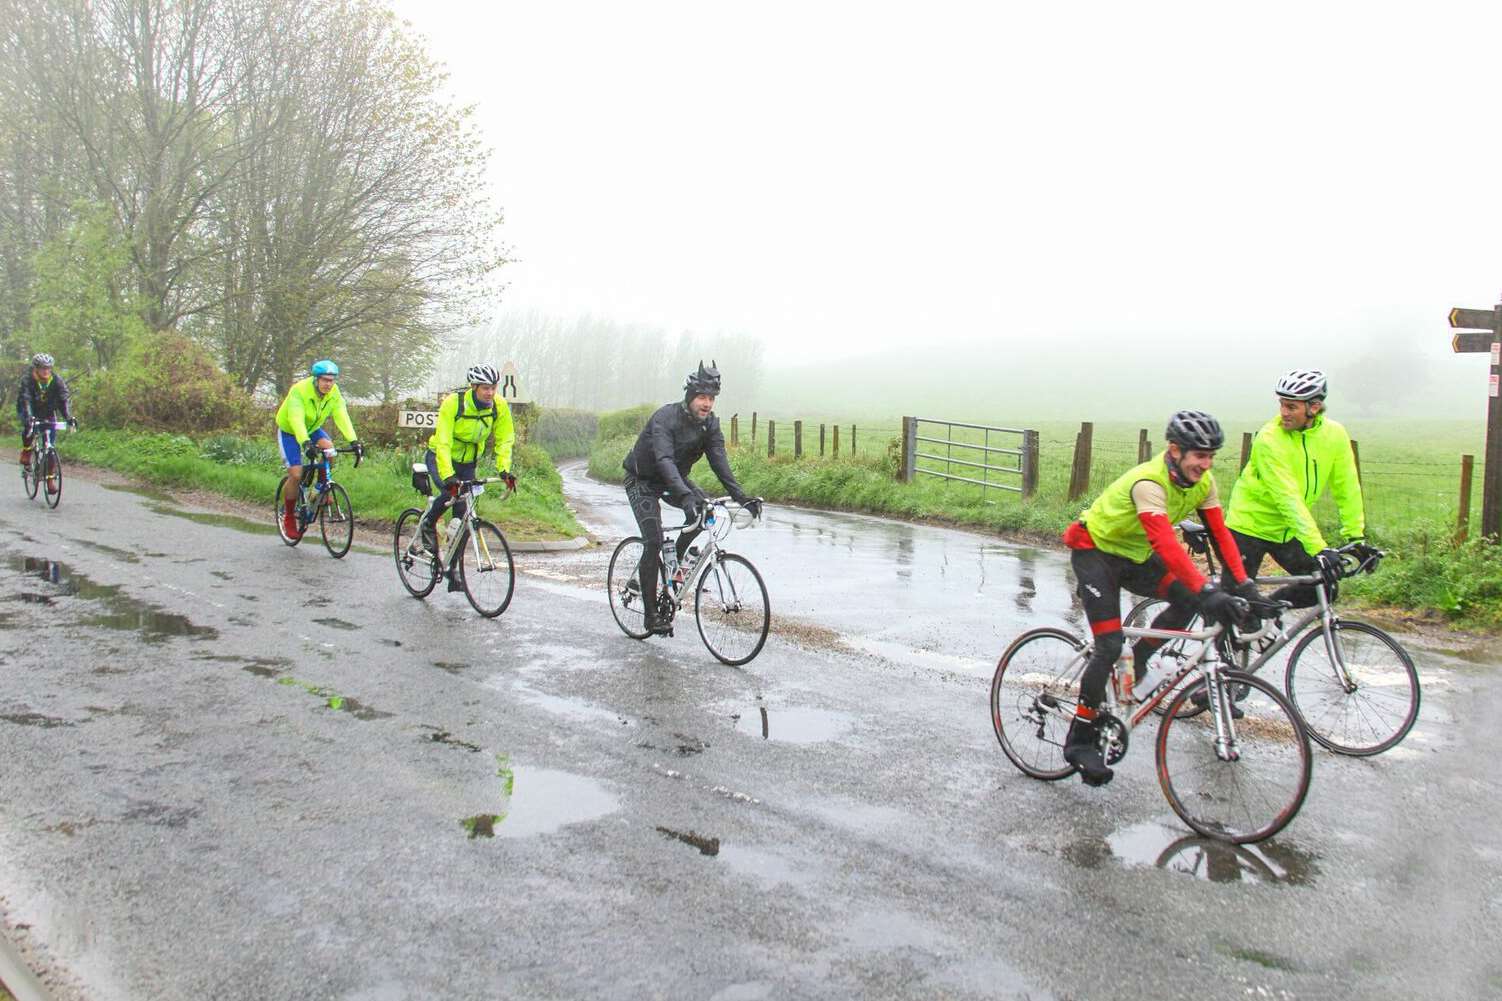 The cyclists faced wet and windy weather